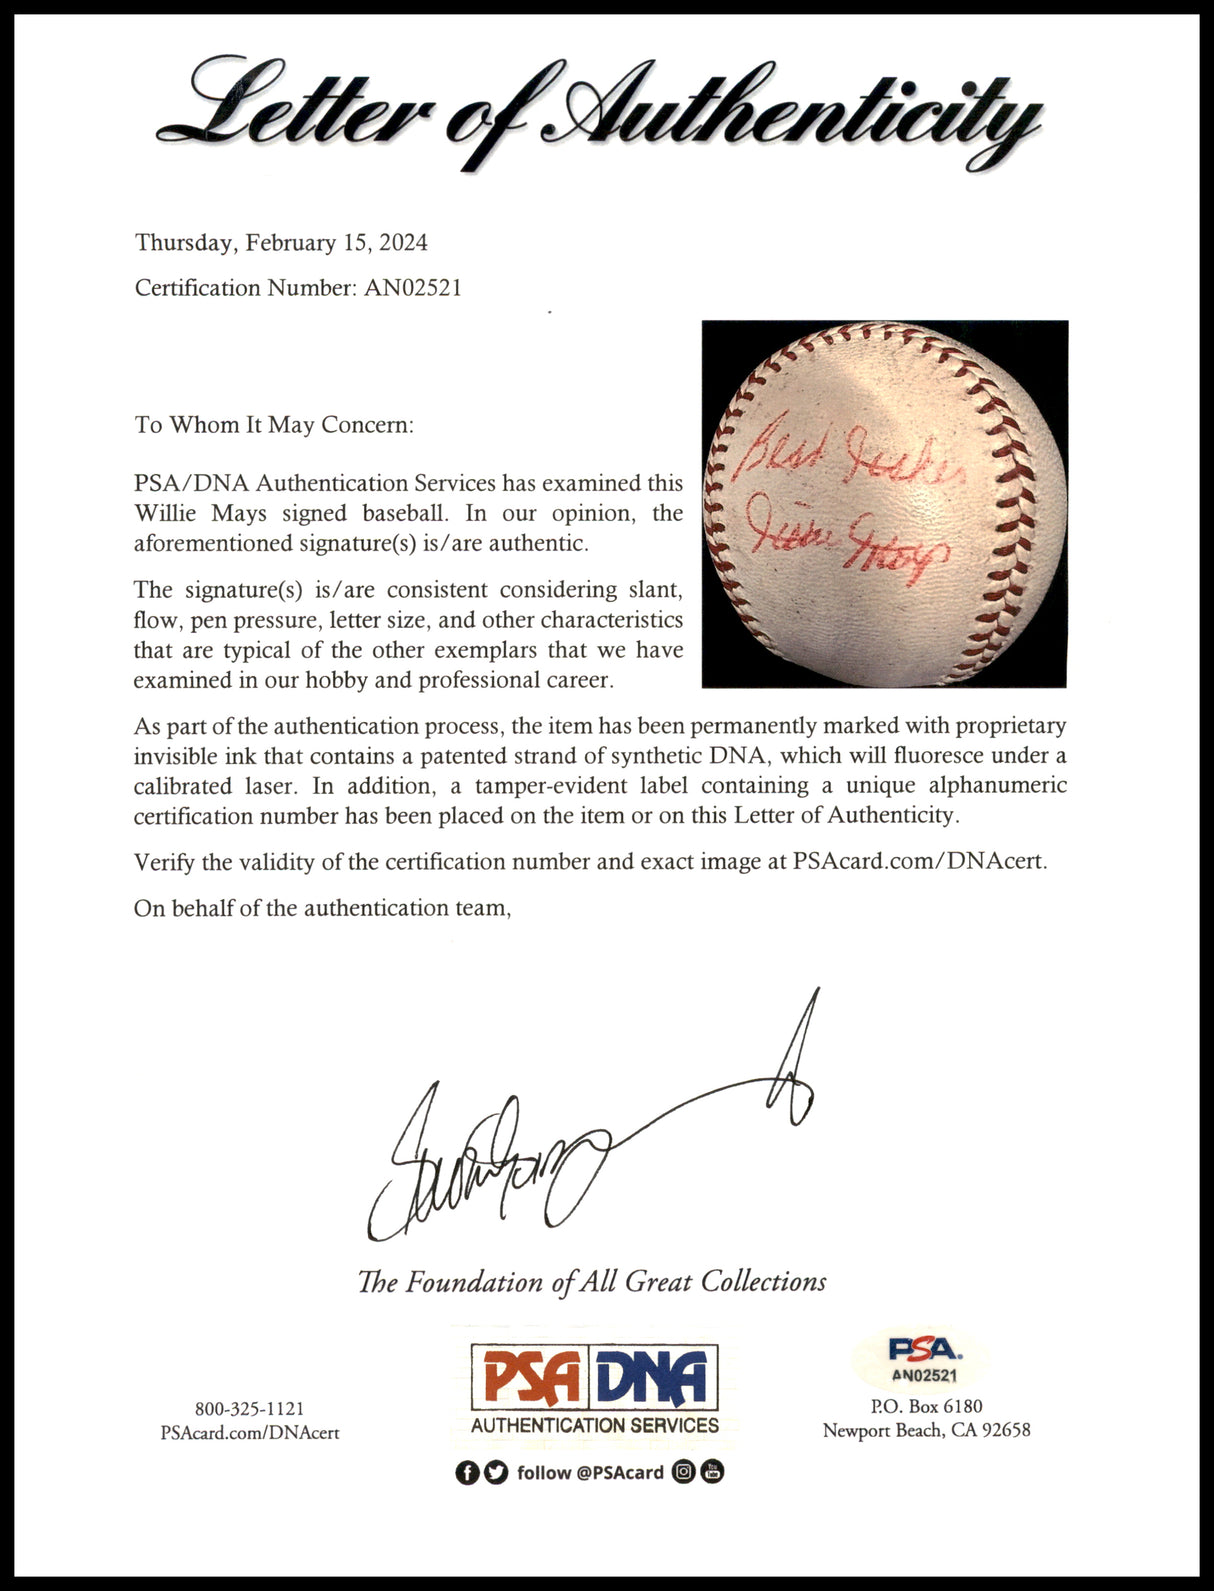 Willie Mays Autographed Official Giles NL Baseball San Francisco Giants "Best Wishes" Vintage 1960's Playing Days Signature PSA/DNA #AN02521